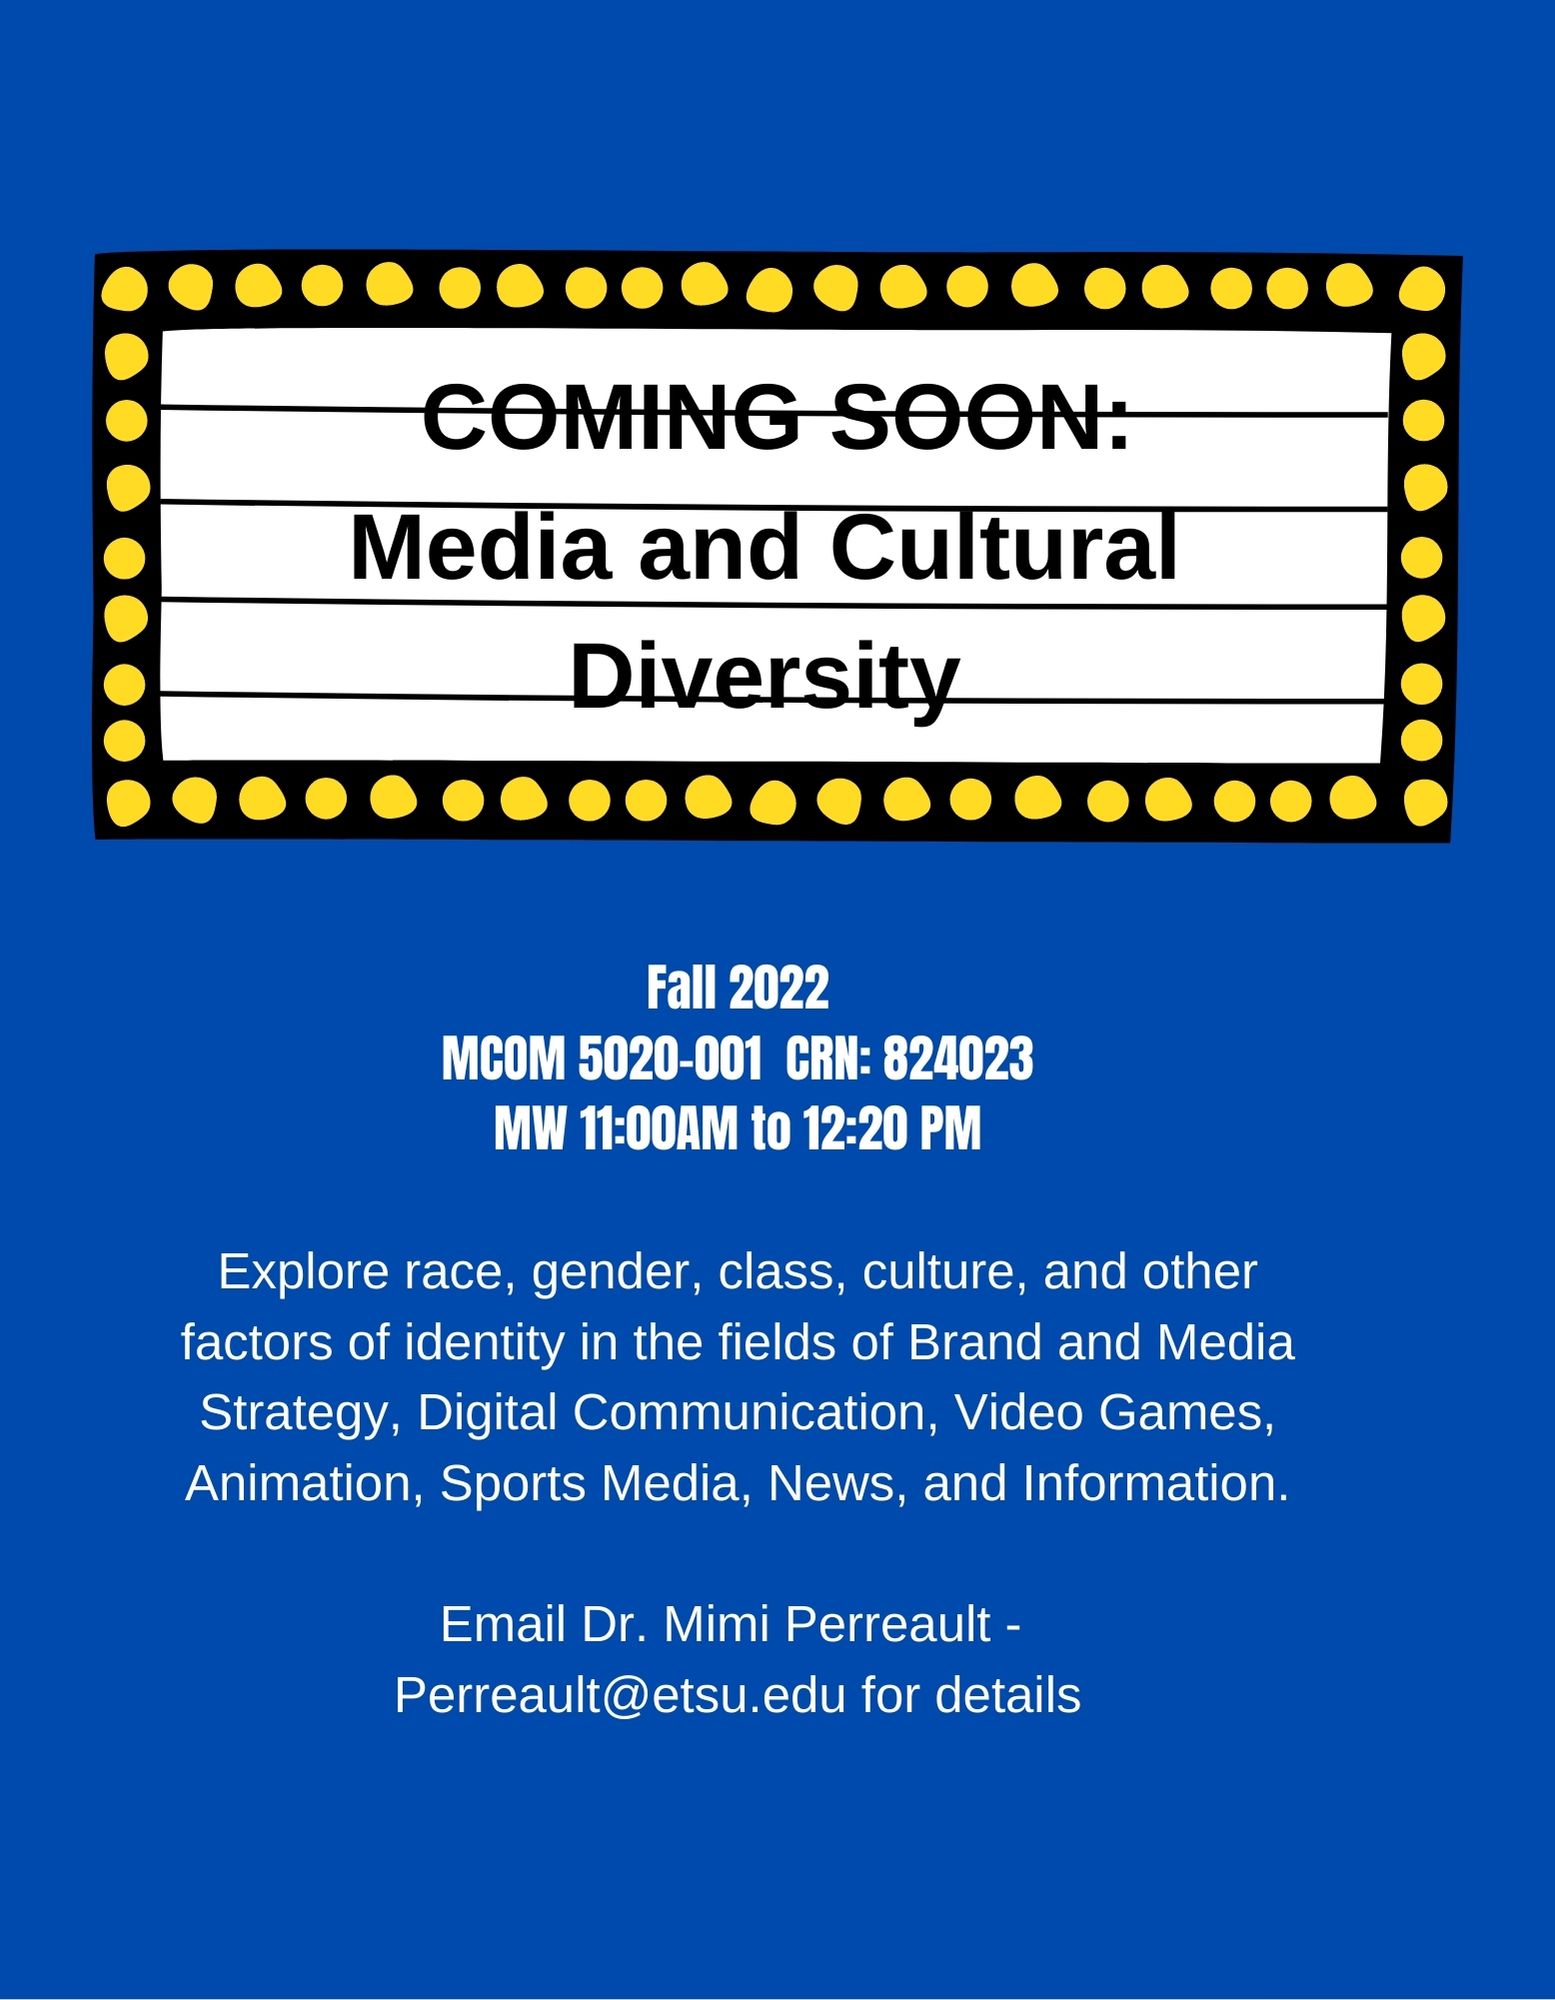 Media and Cultural Diversity class flyer with details in the comments above.